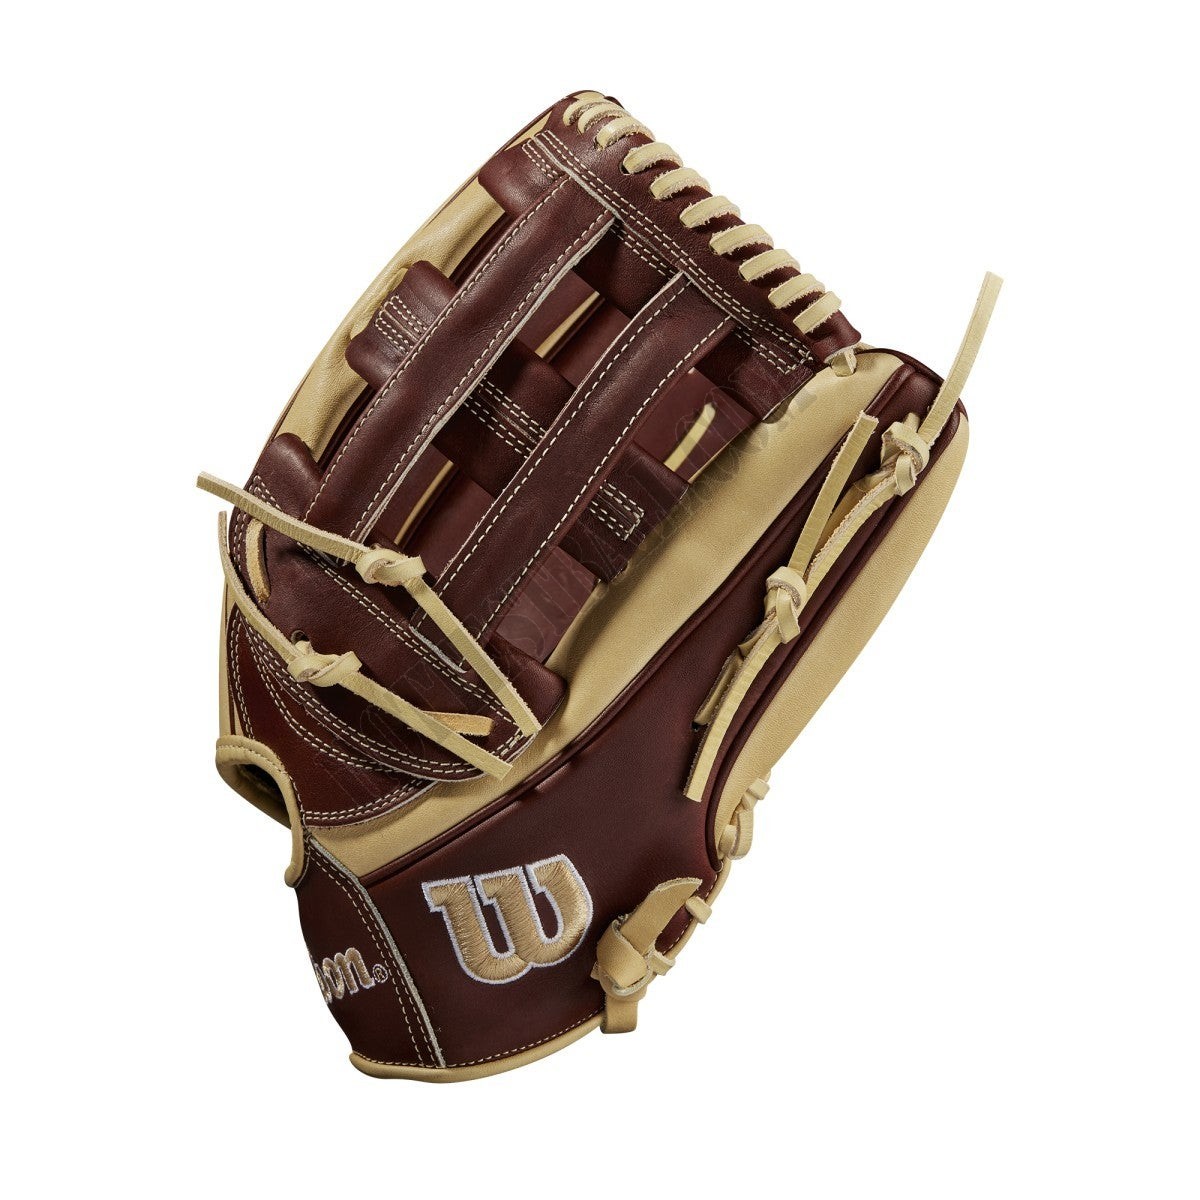 2021 A2000 1799 12.75" Outfield Baseball Glove ● Wilson Promotions - -3